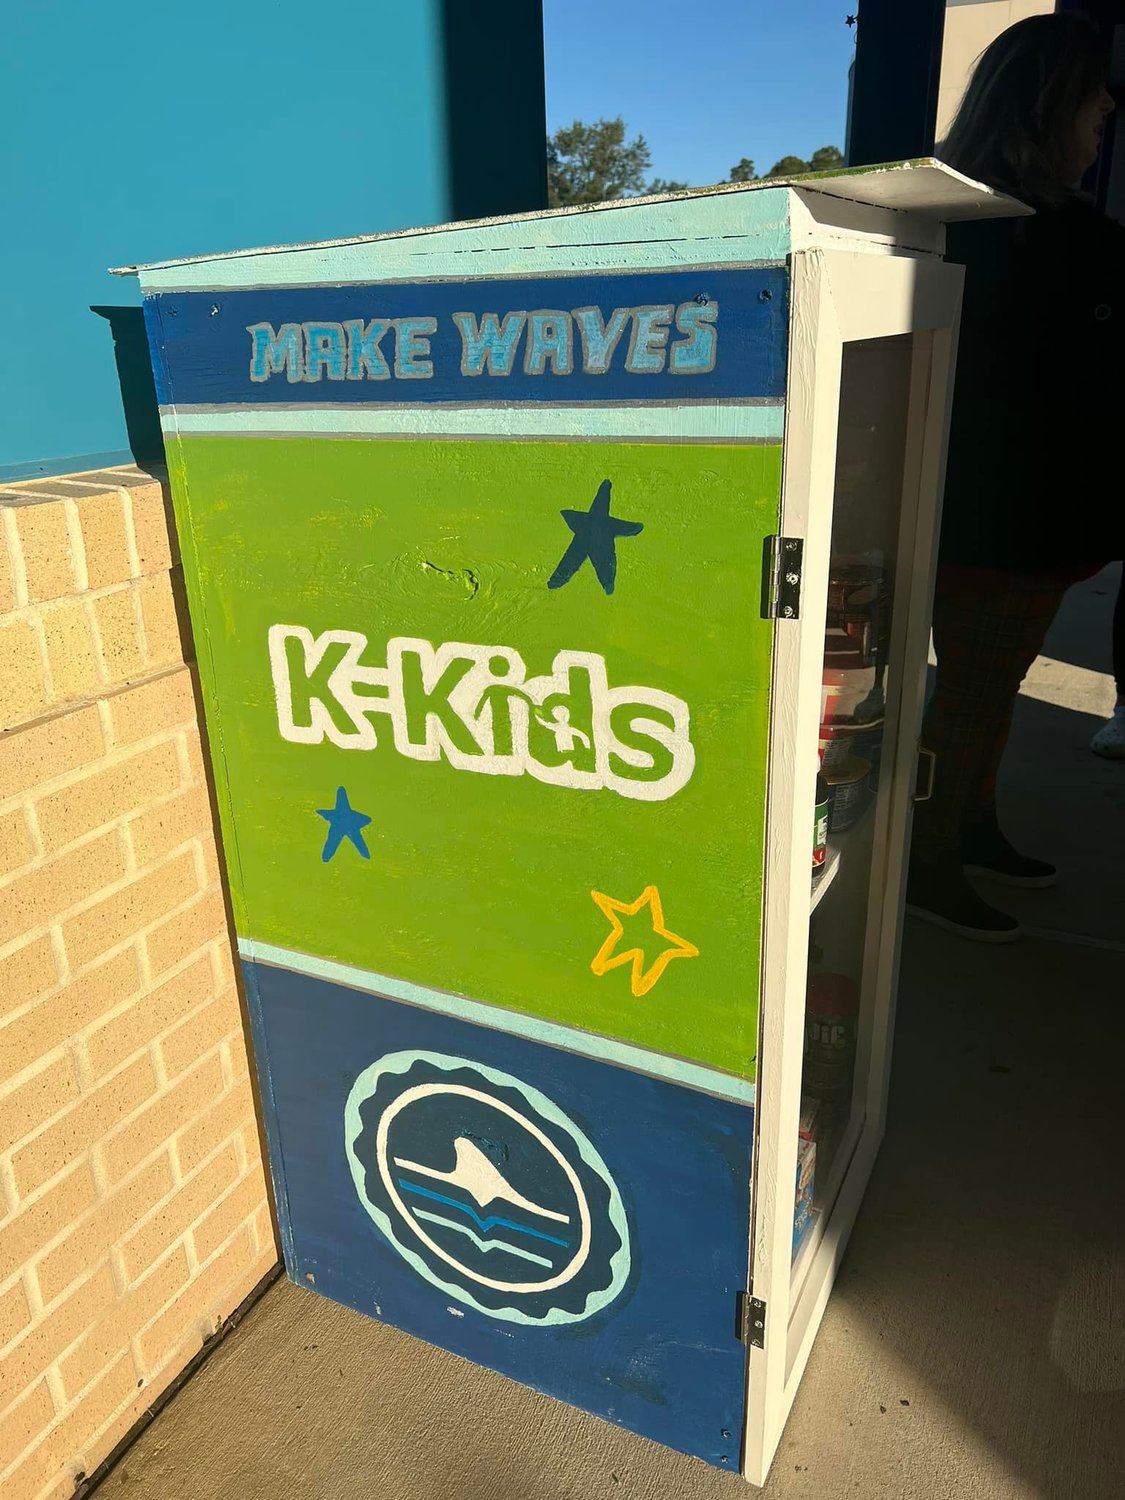 The KKids will check the box and restock daily as needed and anyone in the community can stop by the box to stock it or take what they need.